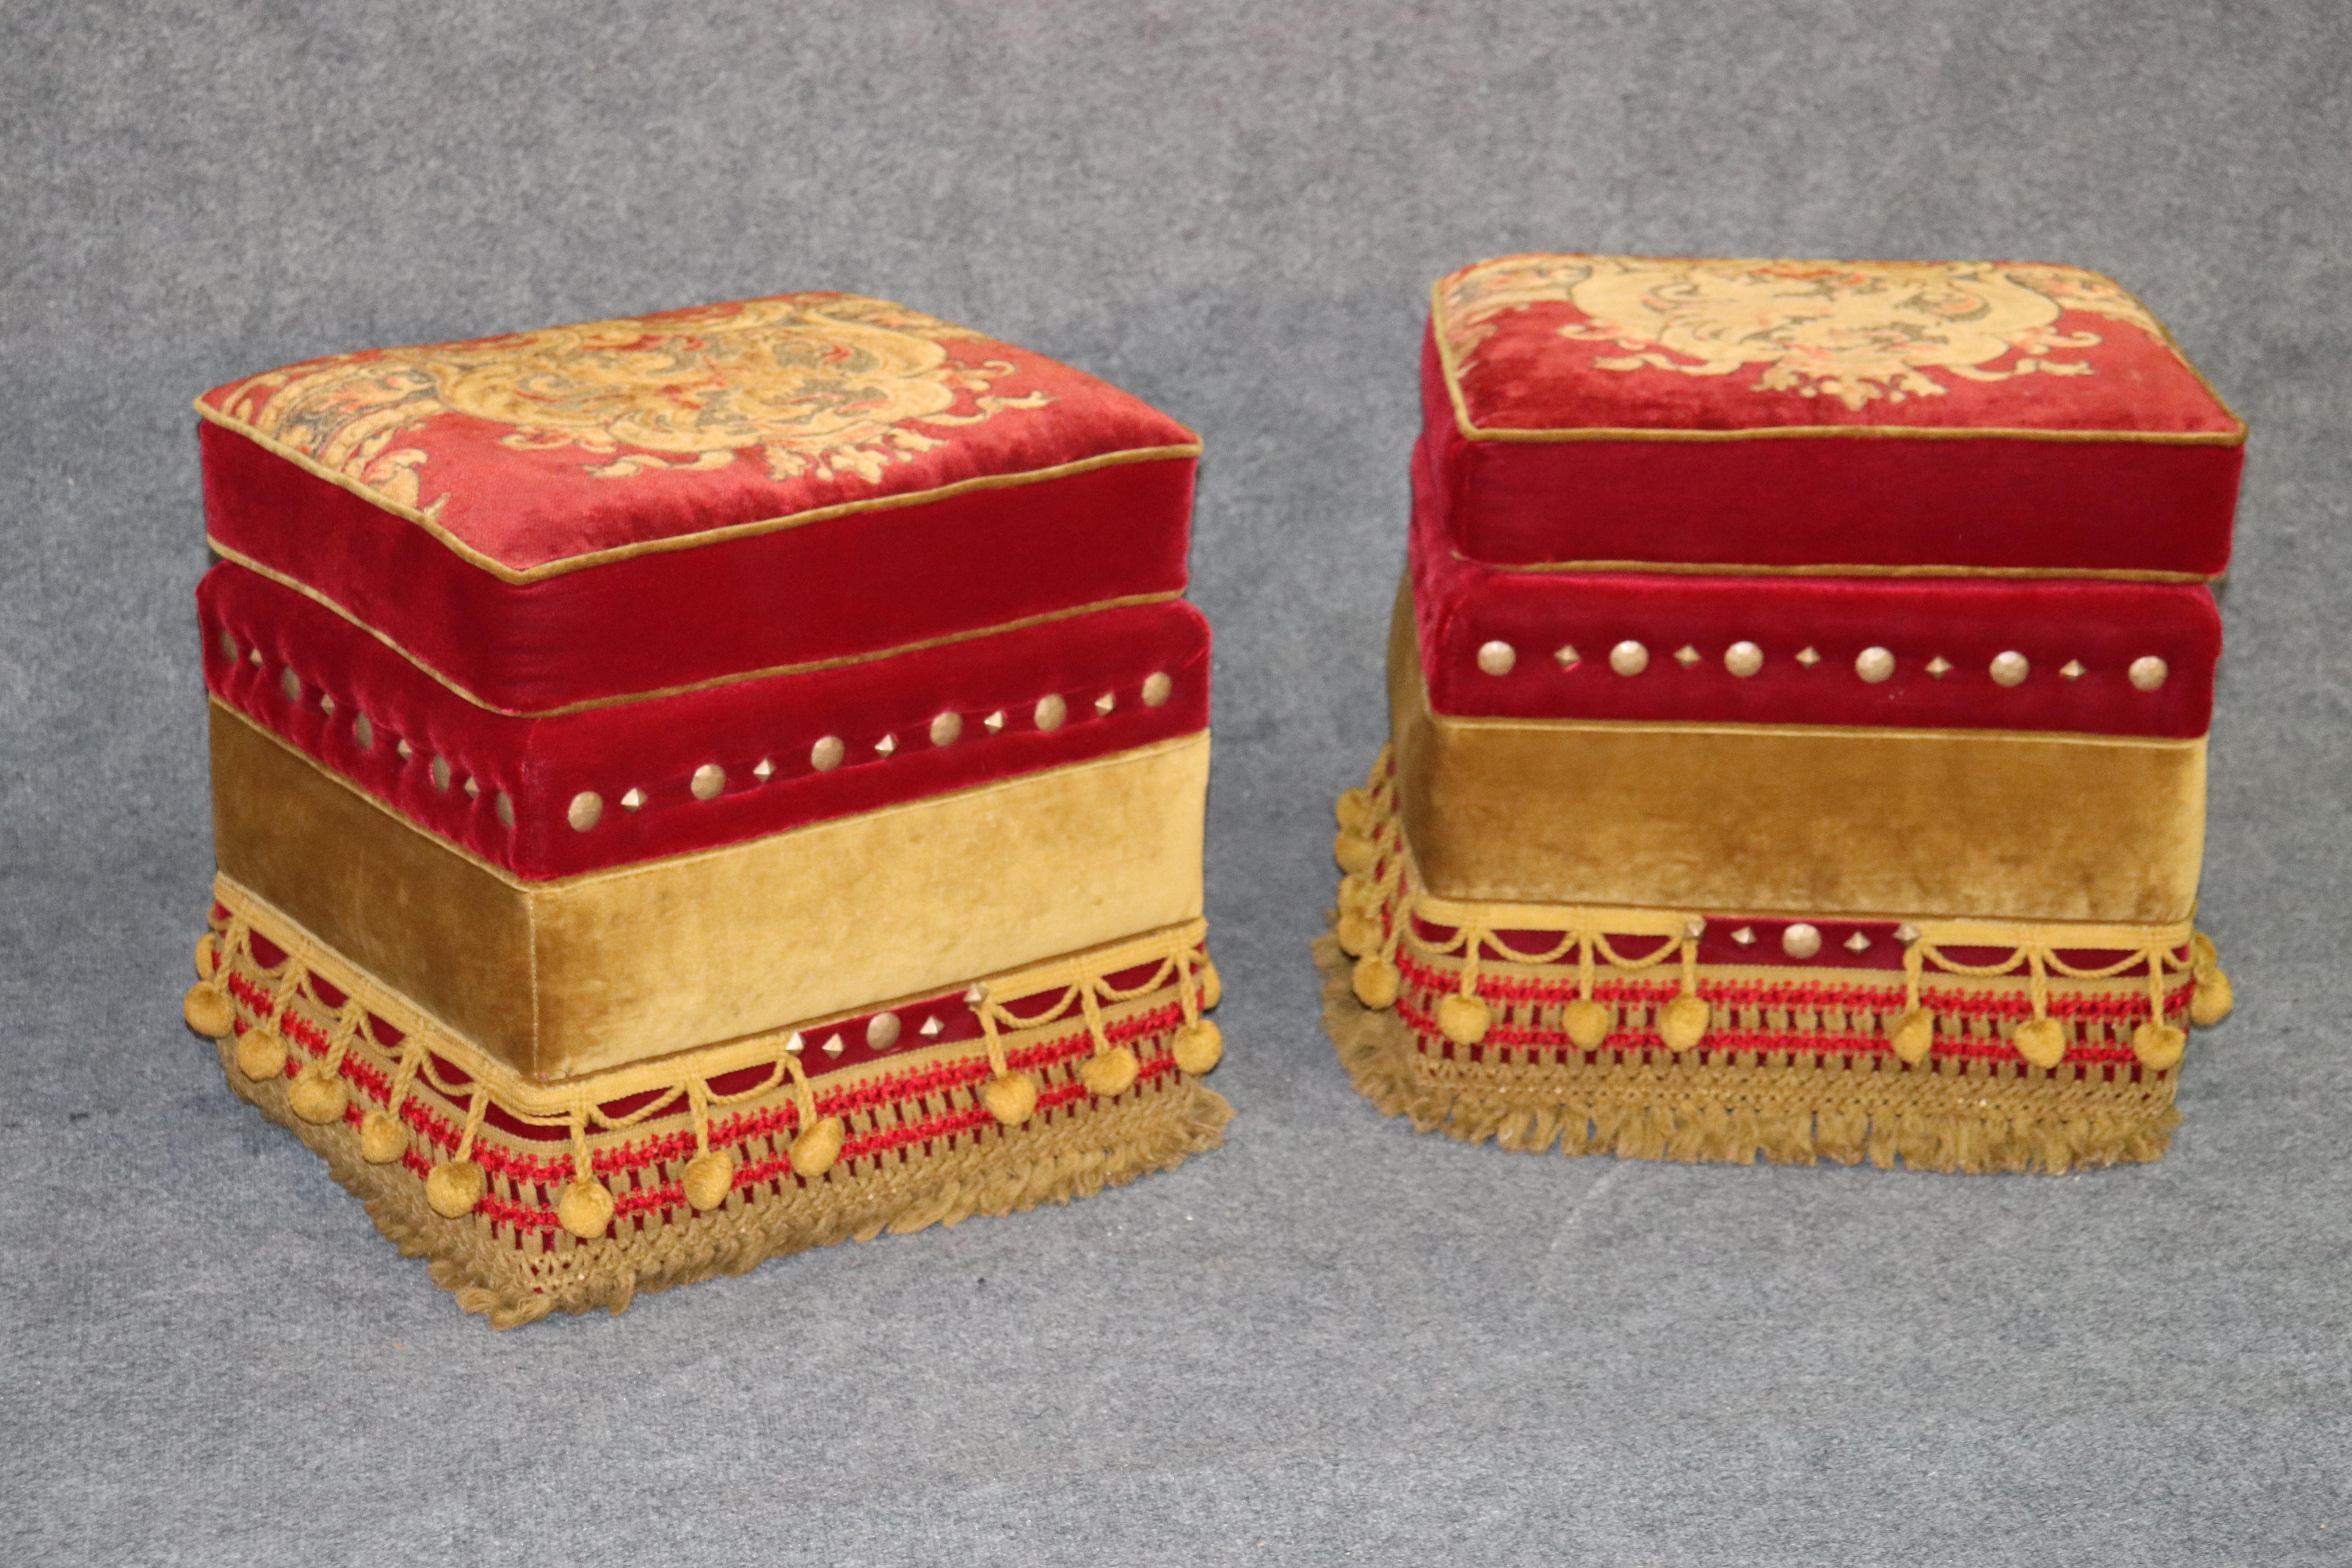 These beautiful rolling stools can be used in a myriad of places in your home. The stools and their upholstery are beautifully done and embroidered and would have costa small fortune when made. They are in good condition and feature much desired